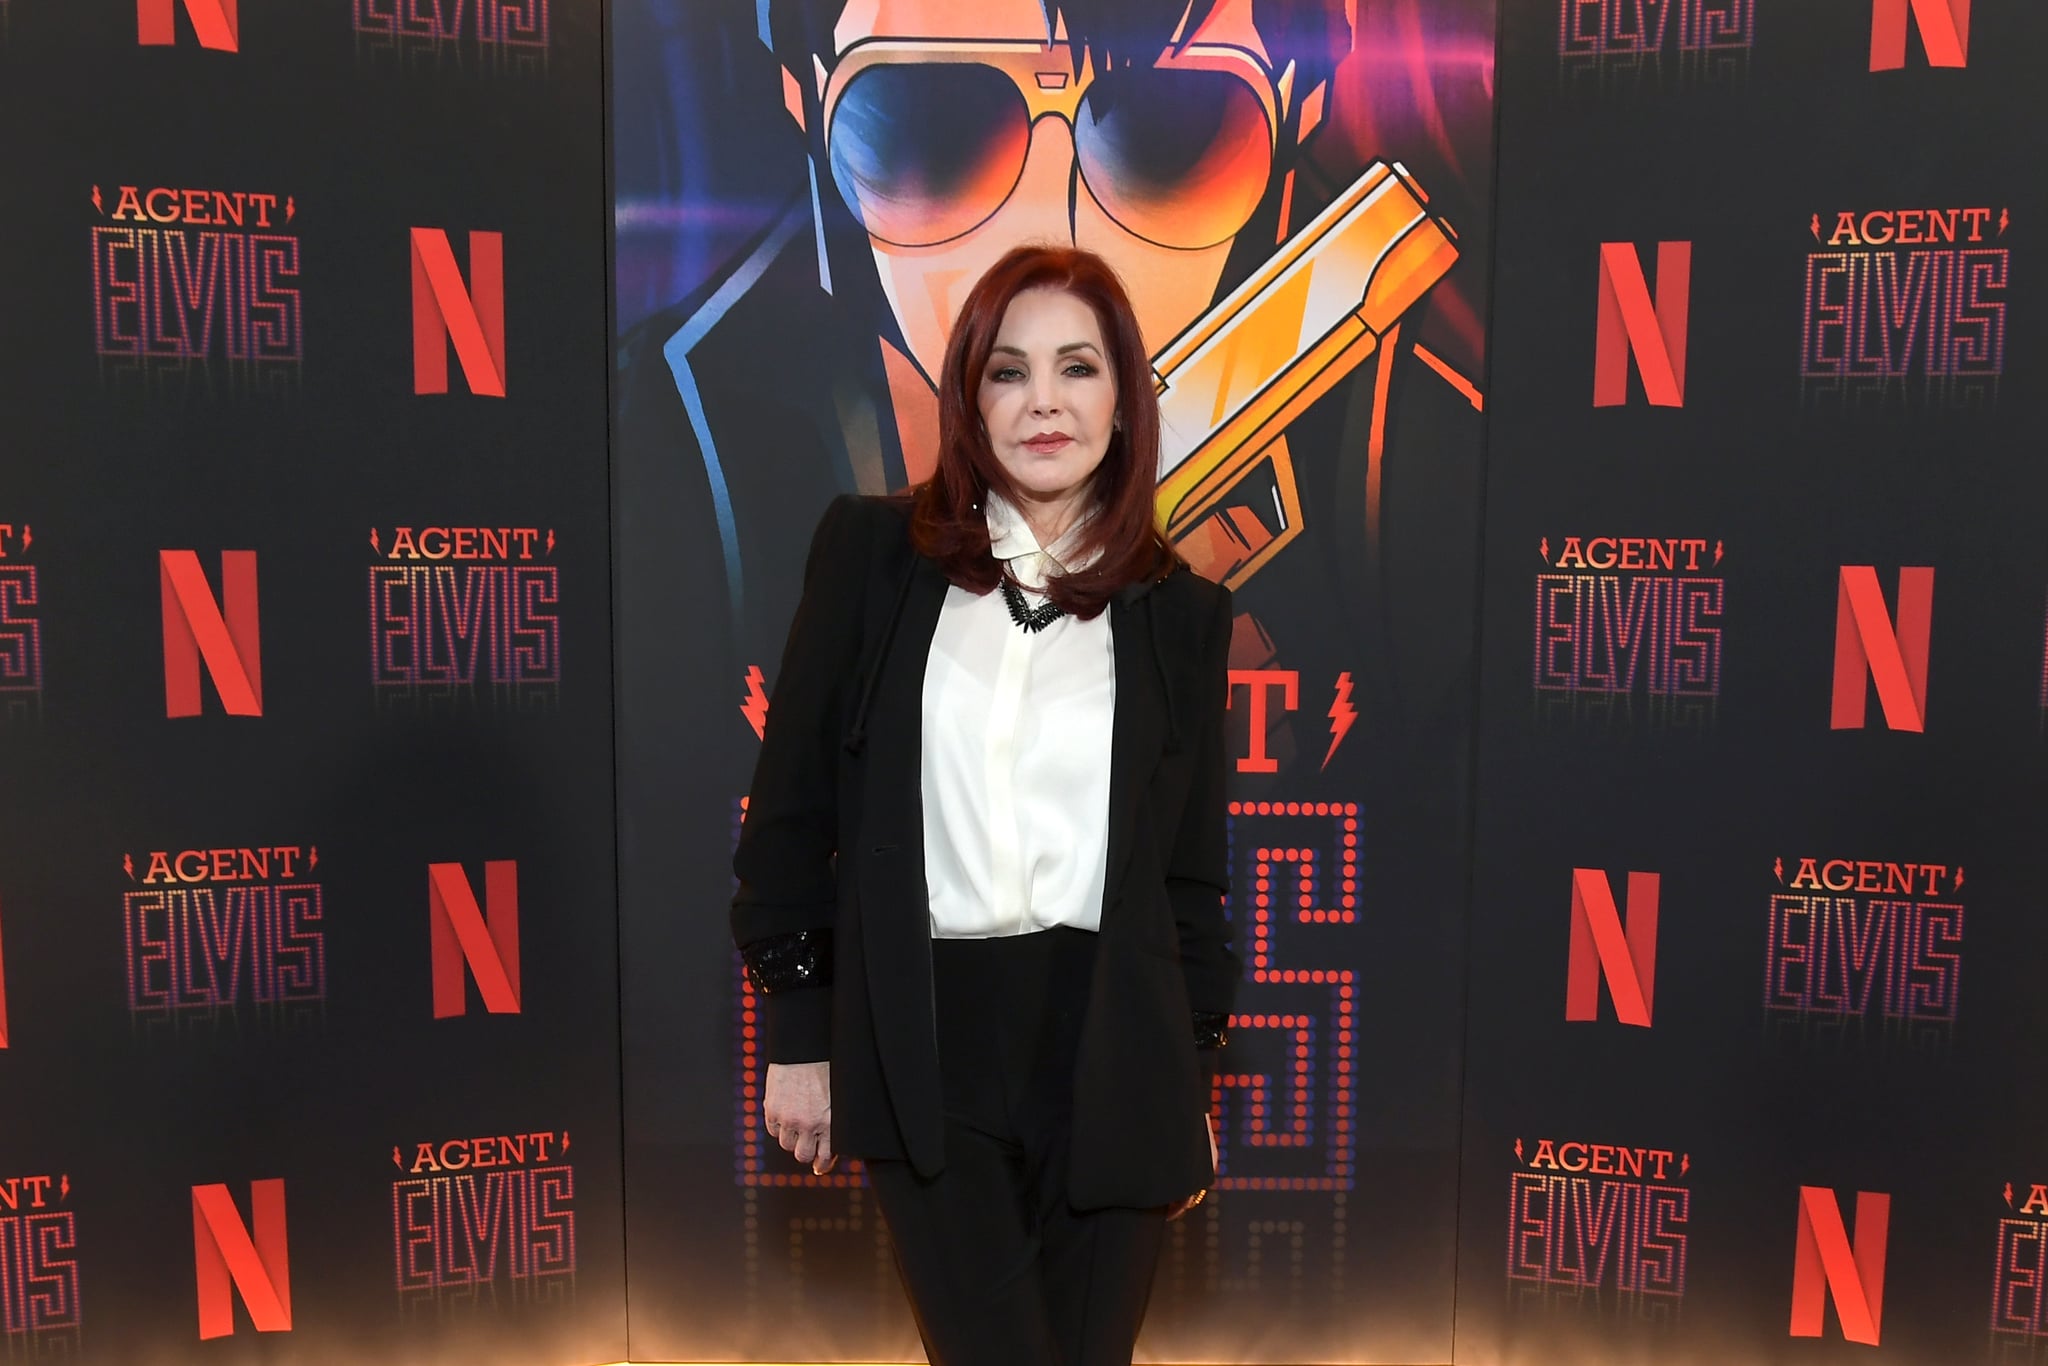  Priscilla Presley attends Agent Elvis ATAS Official at Netflix Tudum Theater on March 07, 2023 in Los Angeles, California. (Photo by Charley Gallay/Getty Images for Neflix)